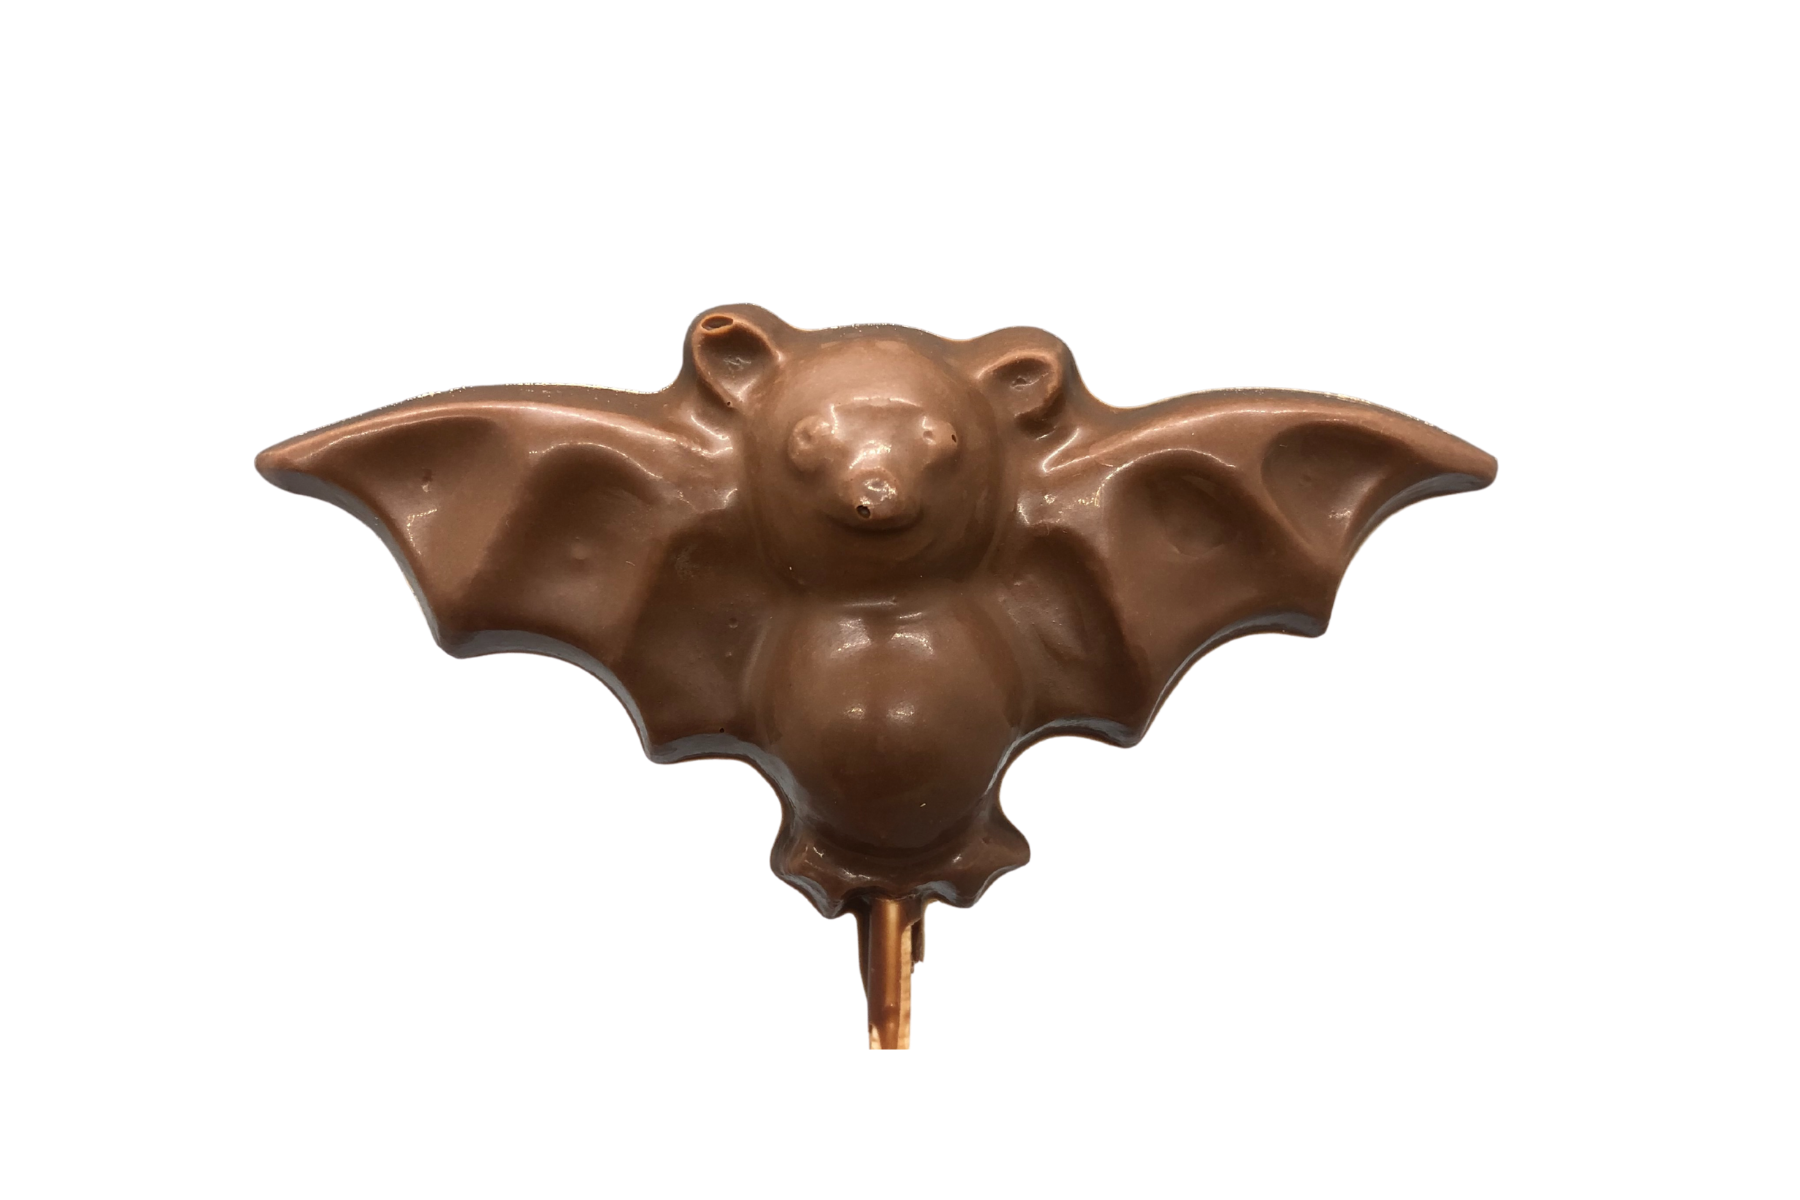 Halloween Milk Chocolate Bat Lollipop – A delightful party favor with spooky charm, perfect for your festive celebrations!